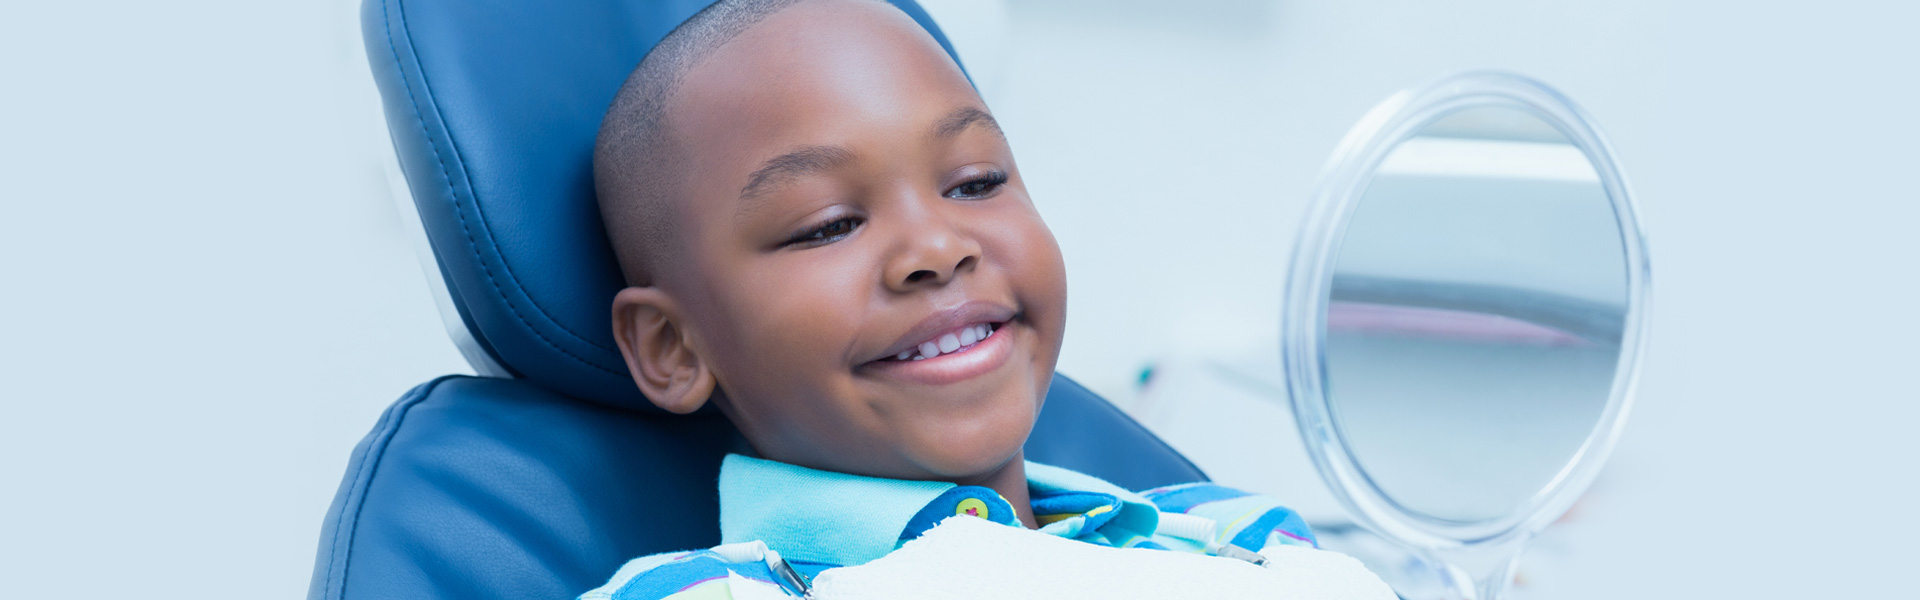 Why Dental Sealants Play an Important Part in Protecting Your Child’s Teeth Rockville, MD